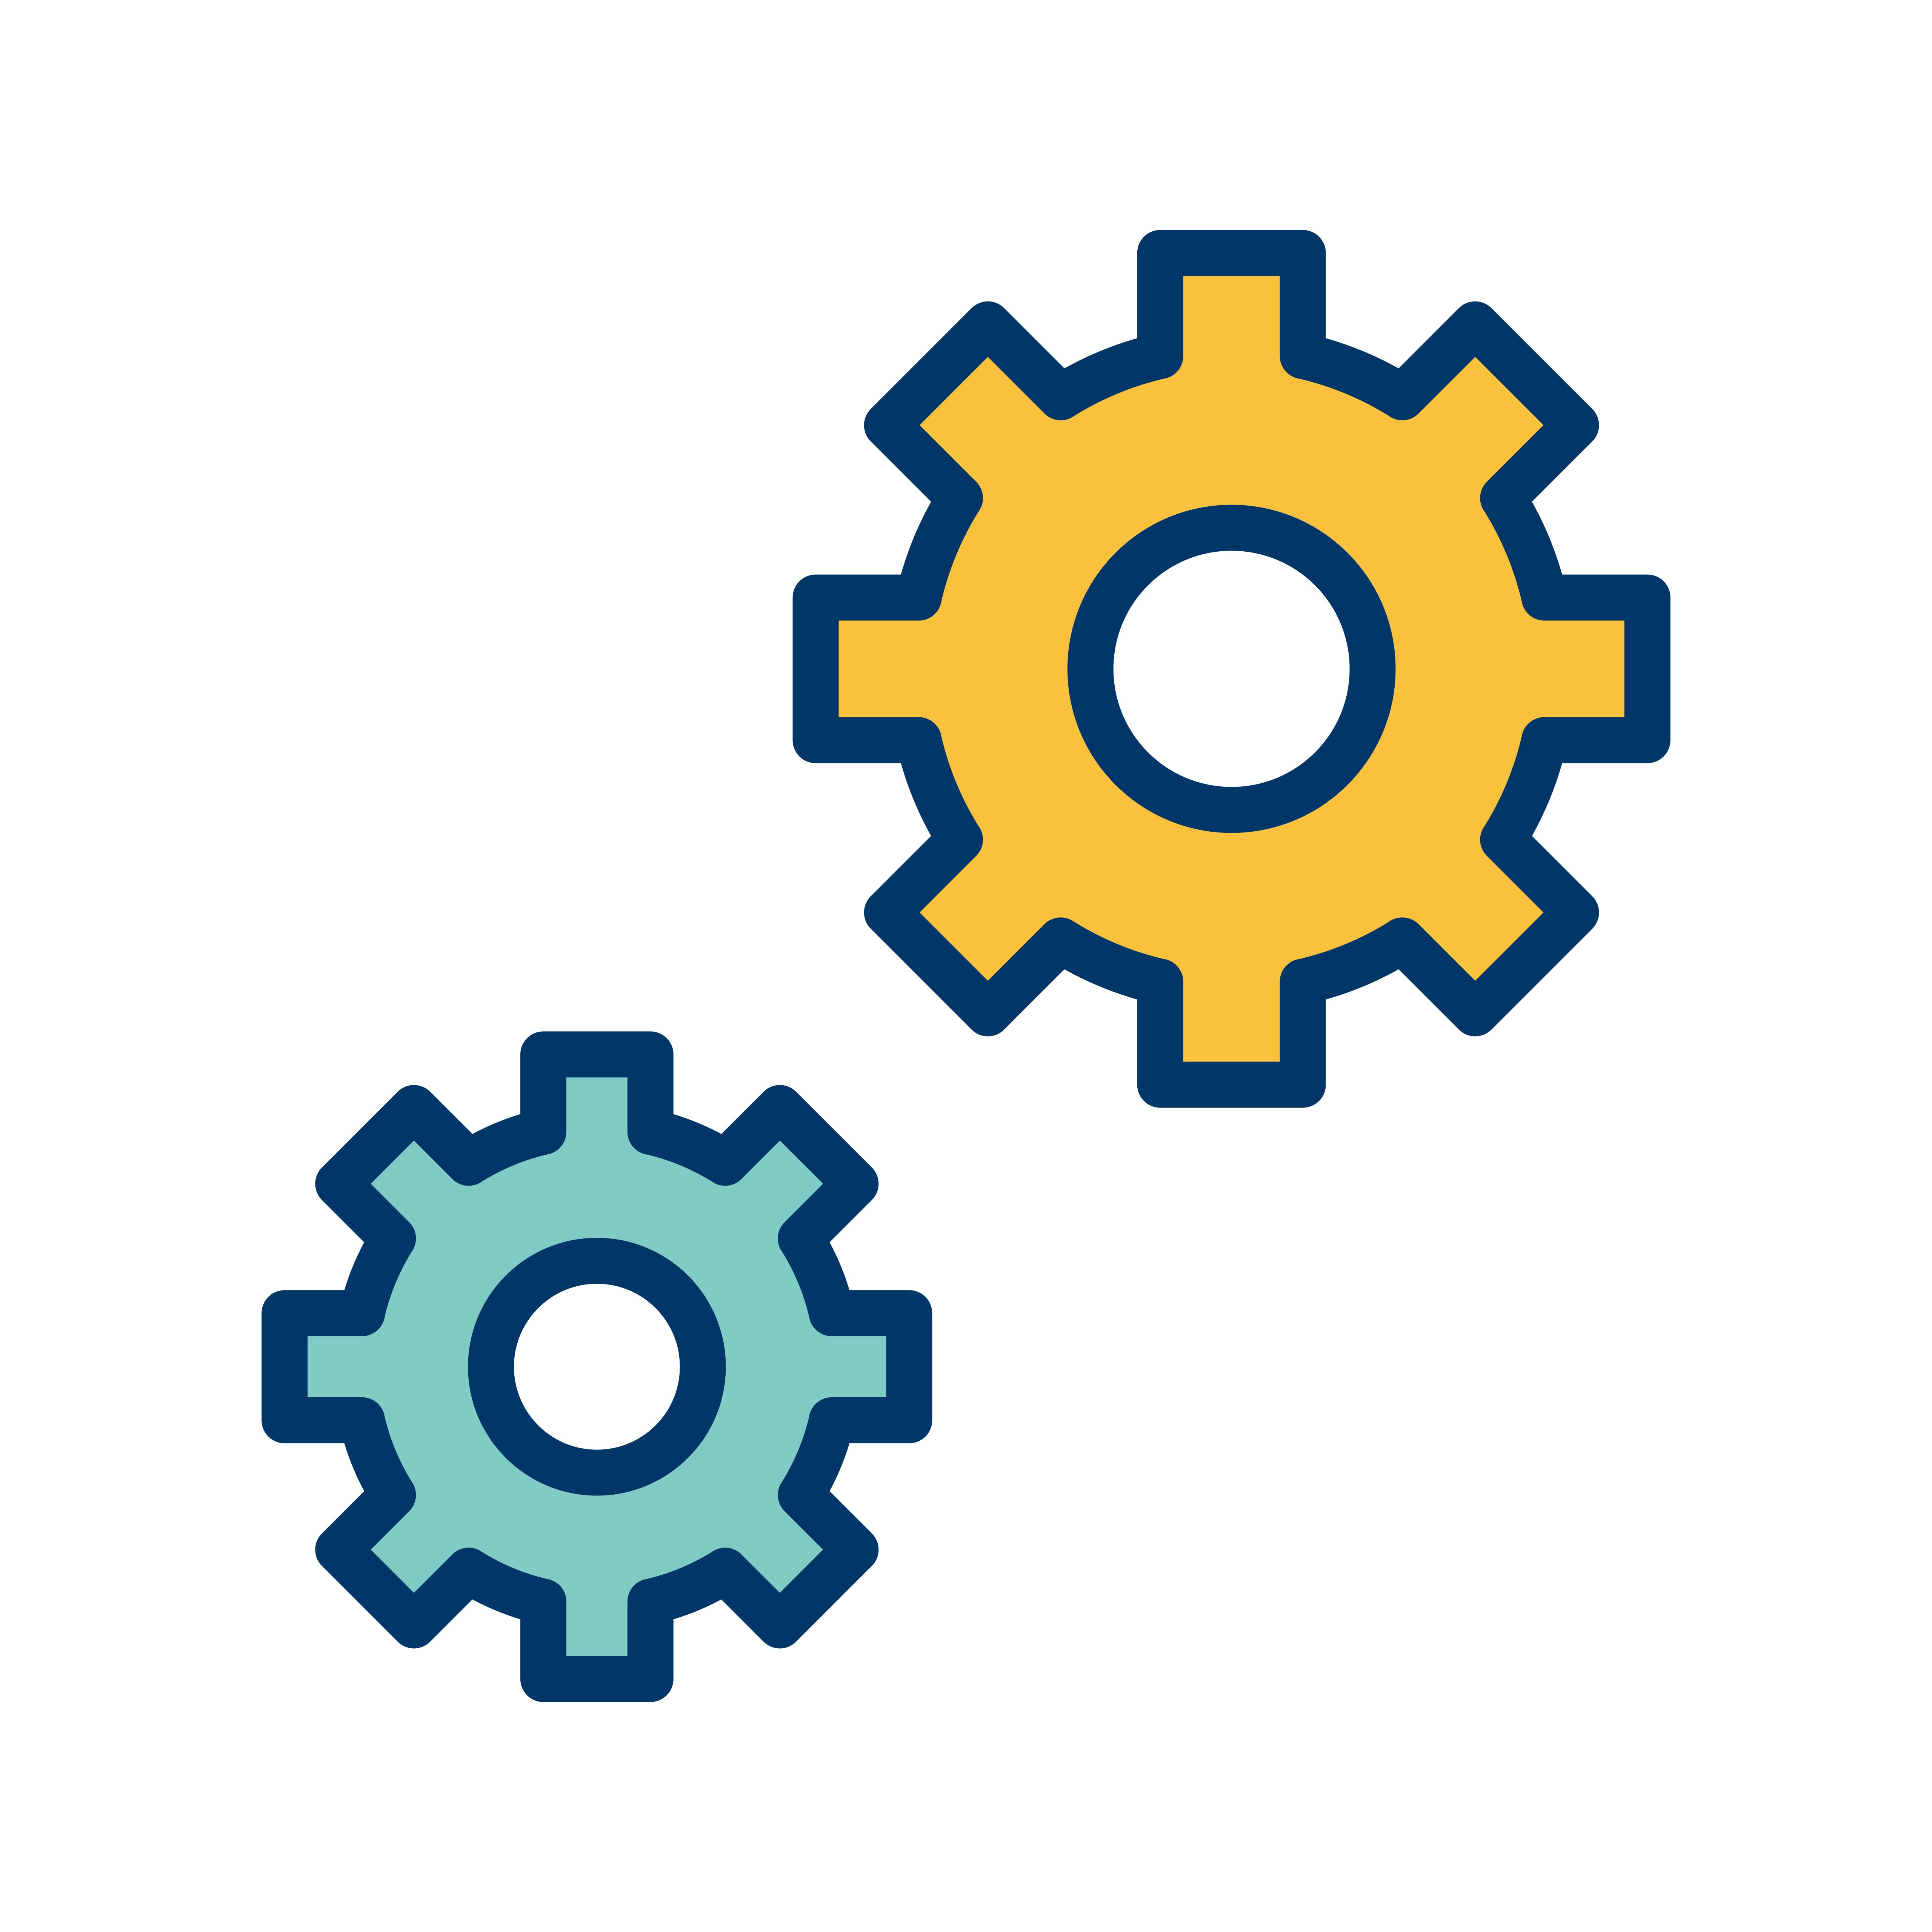 Download Vector Settings Icon 422914 - Download Free Vectors ...